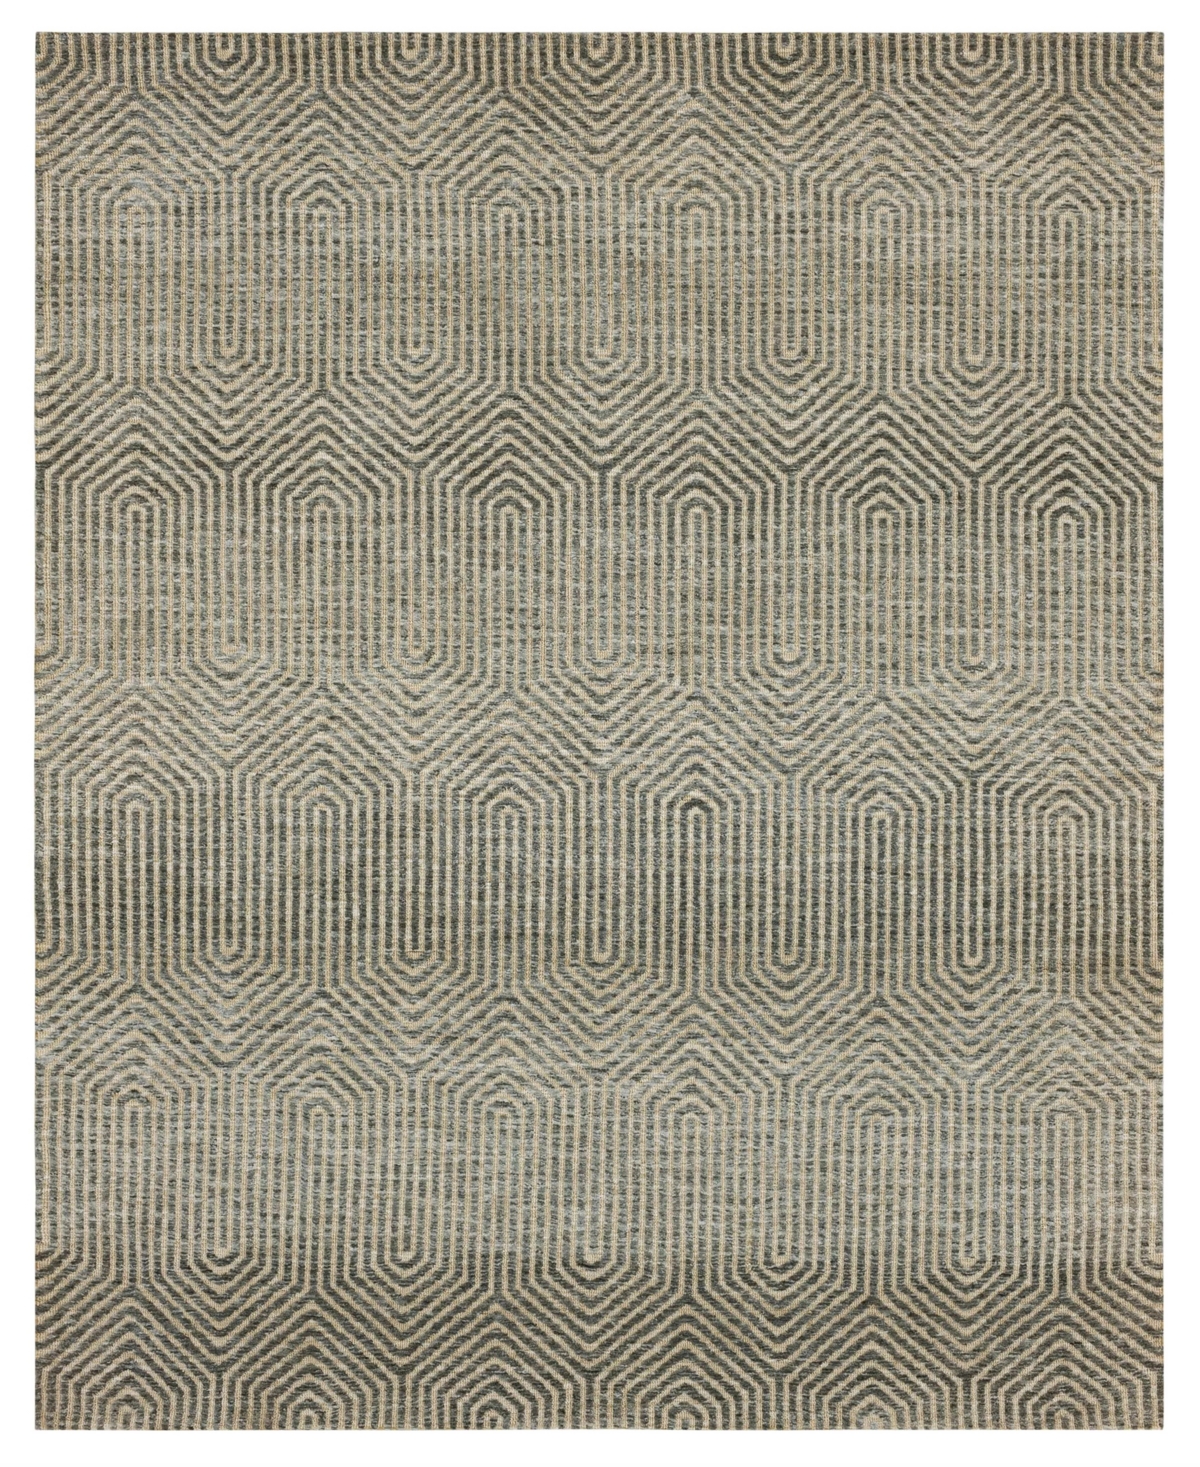 Drew & Jonathan Home Bowen Lost City 5'3" X 7'10" Area Rug In Neutral